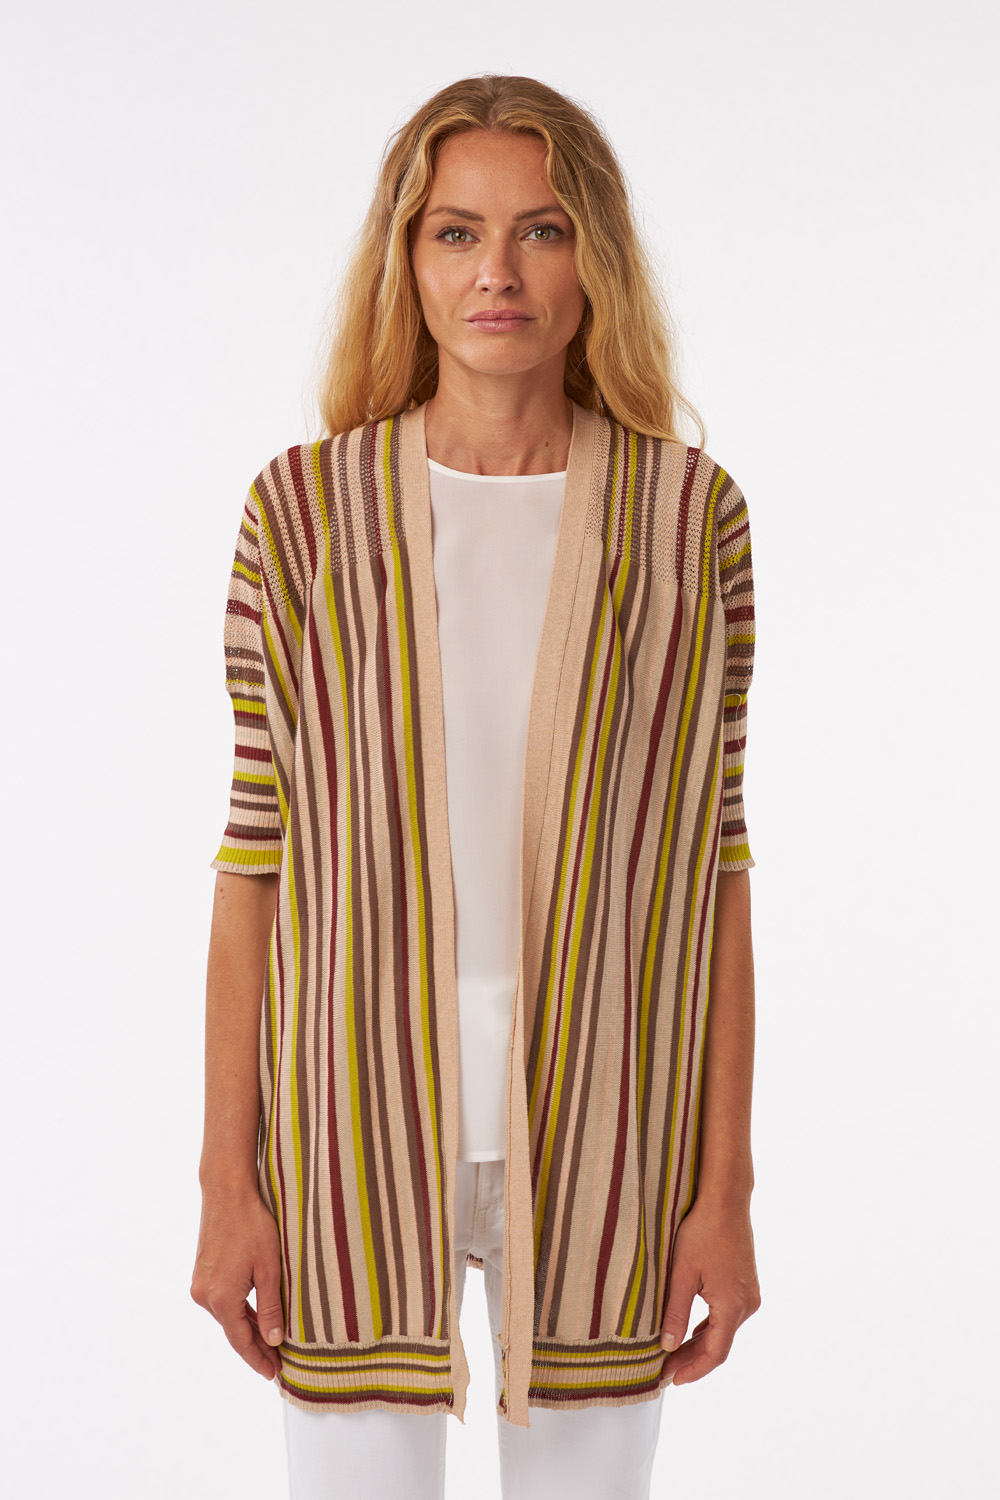 bottonless caban in cotton, multicolor stripes